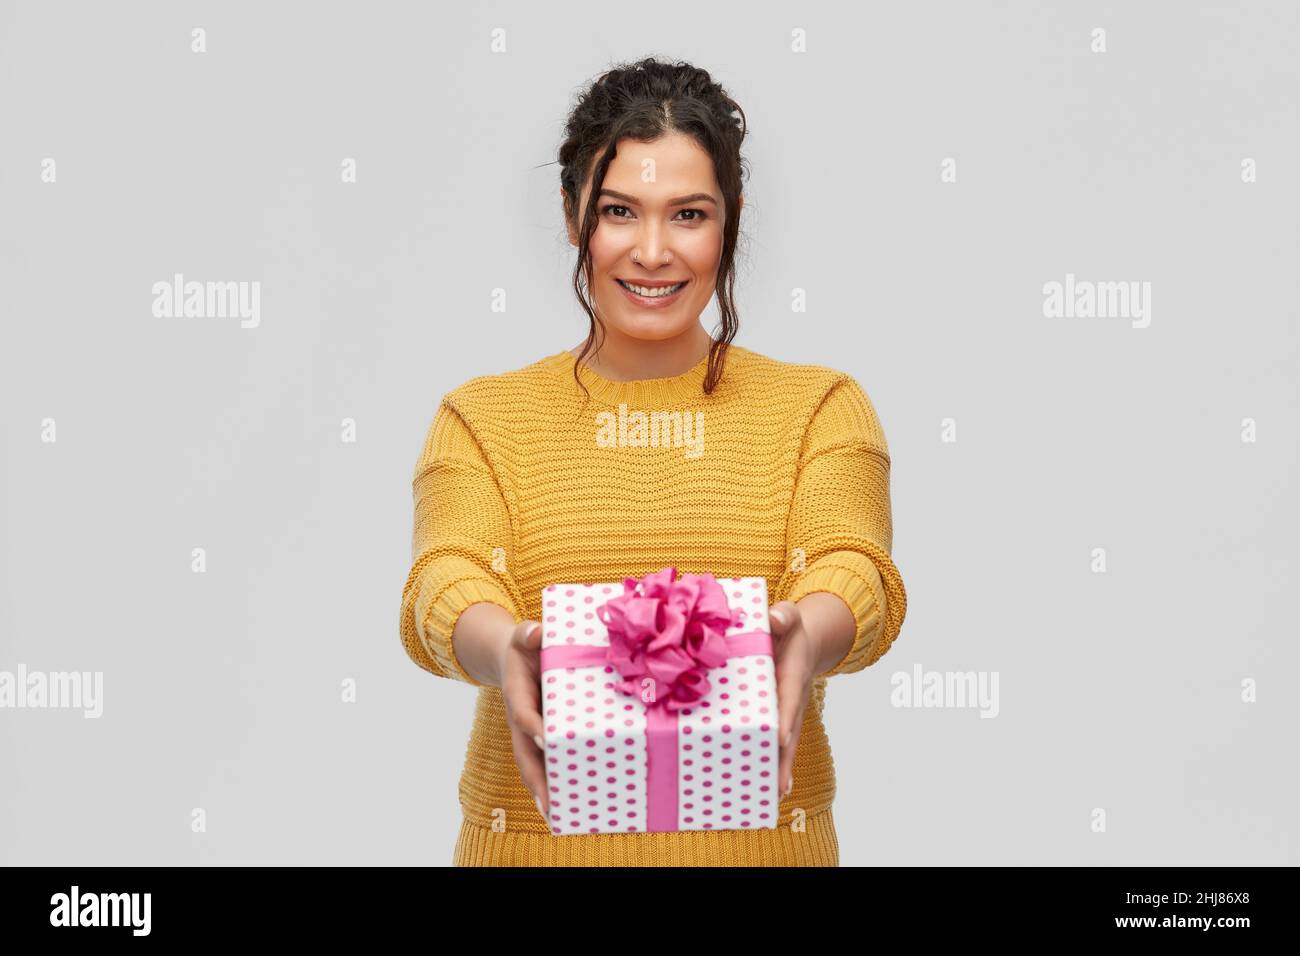 smiling young woman holding gift box Stock Photo